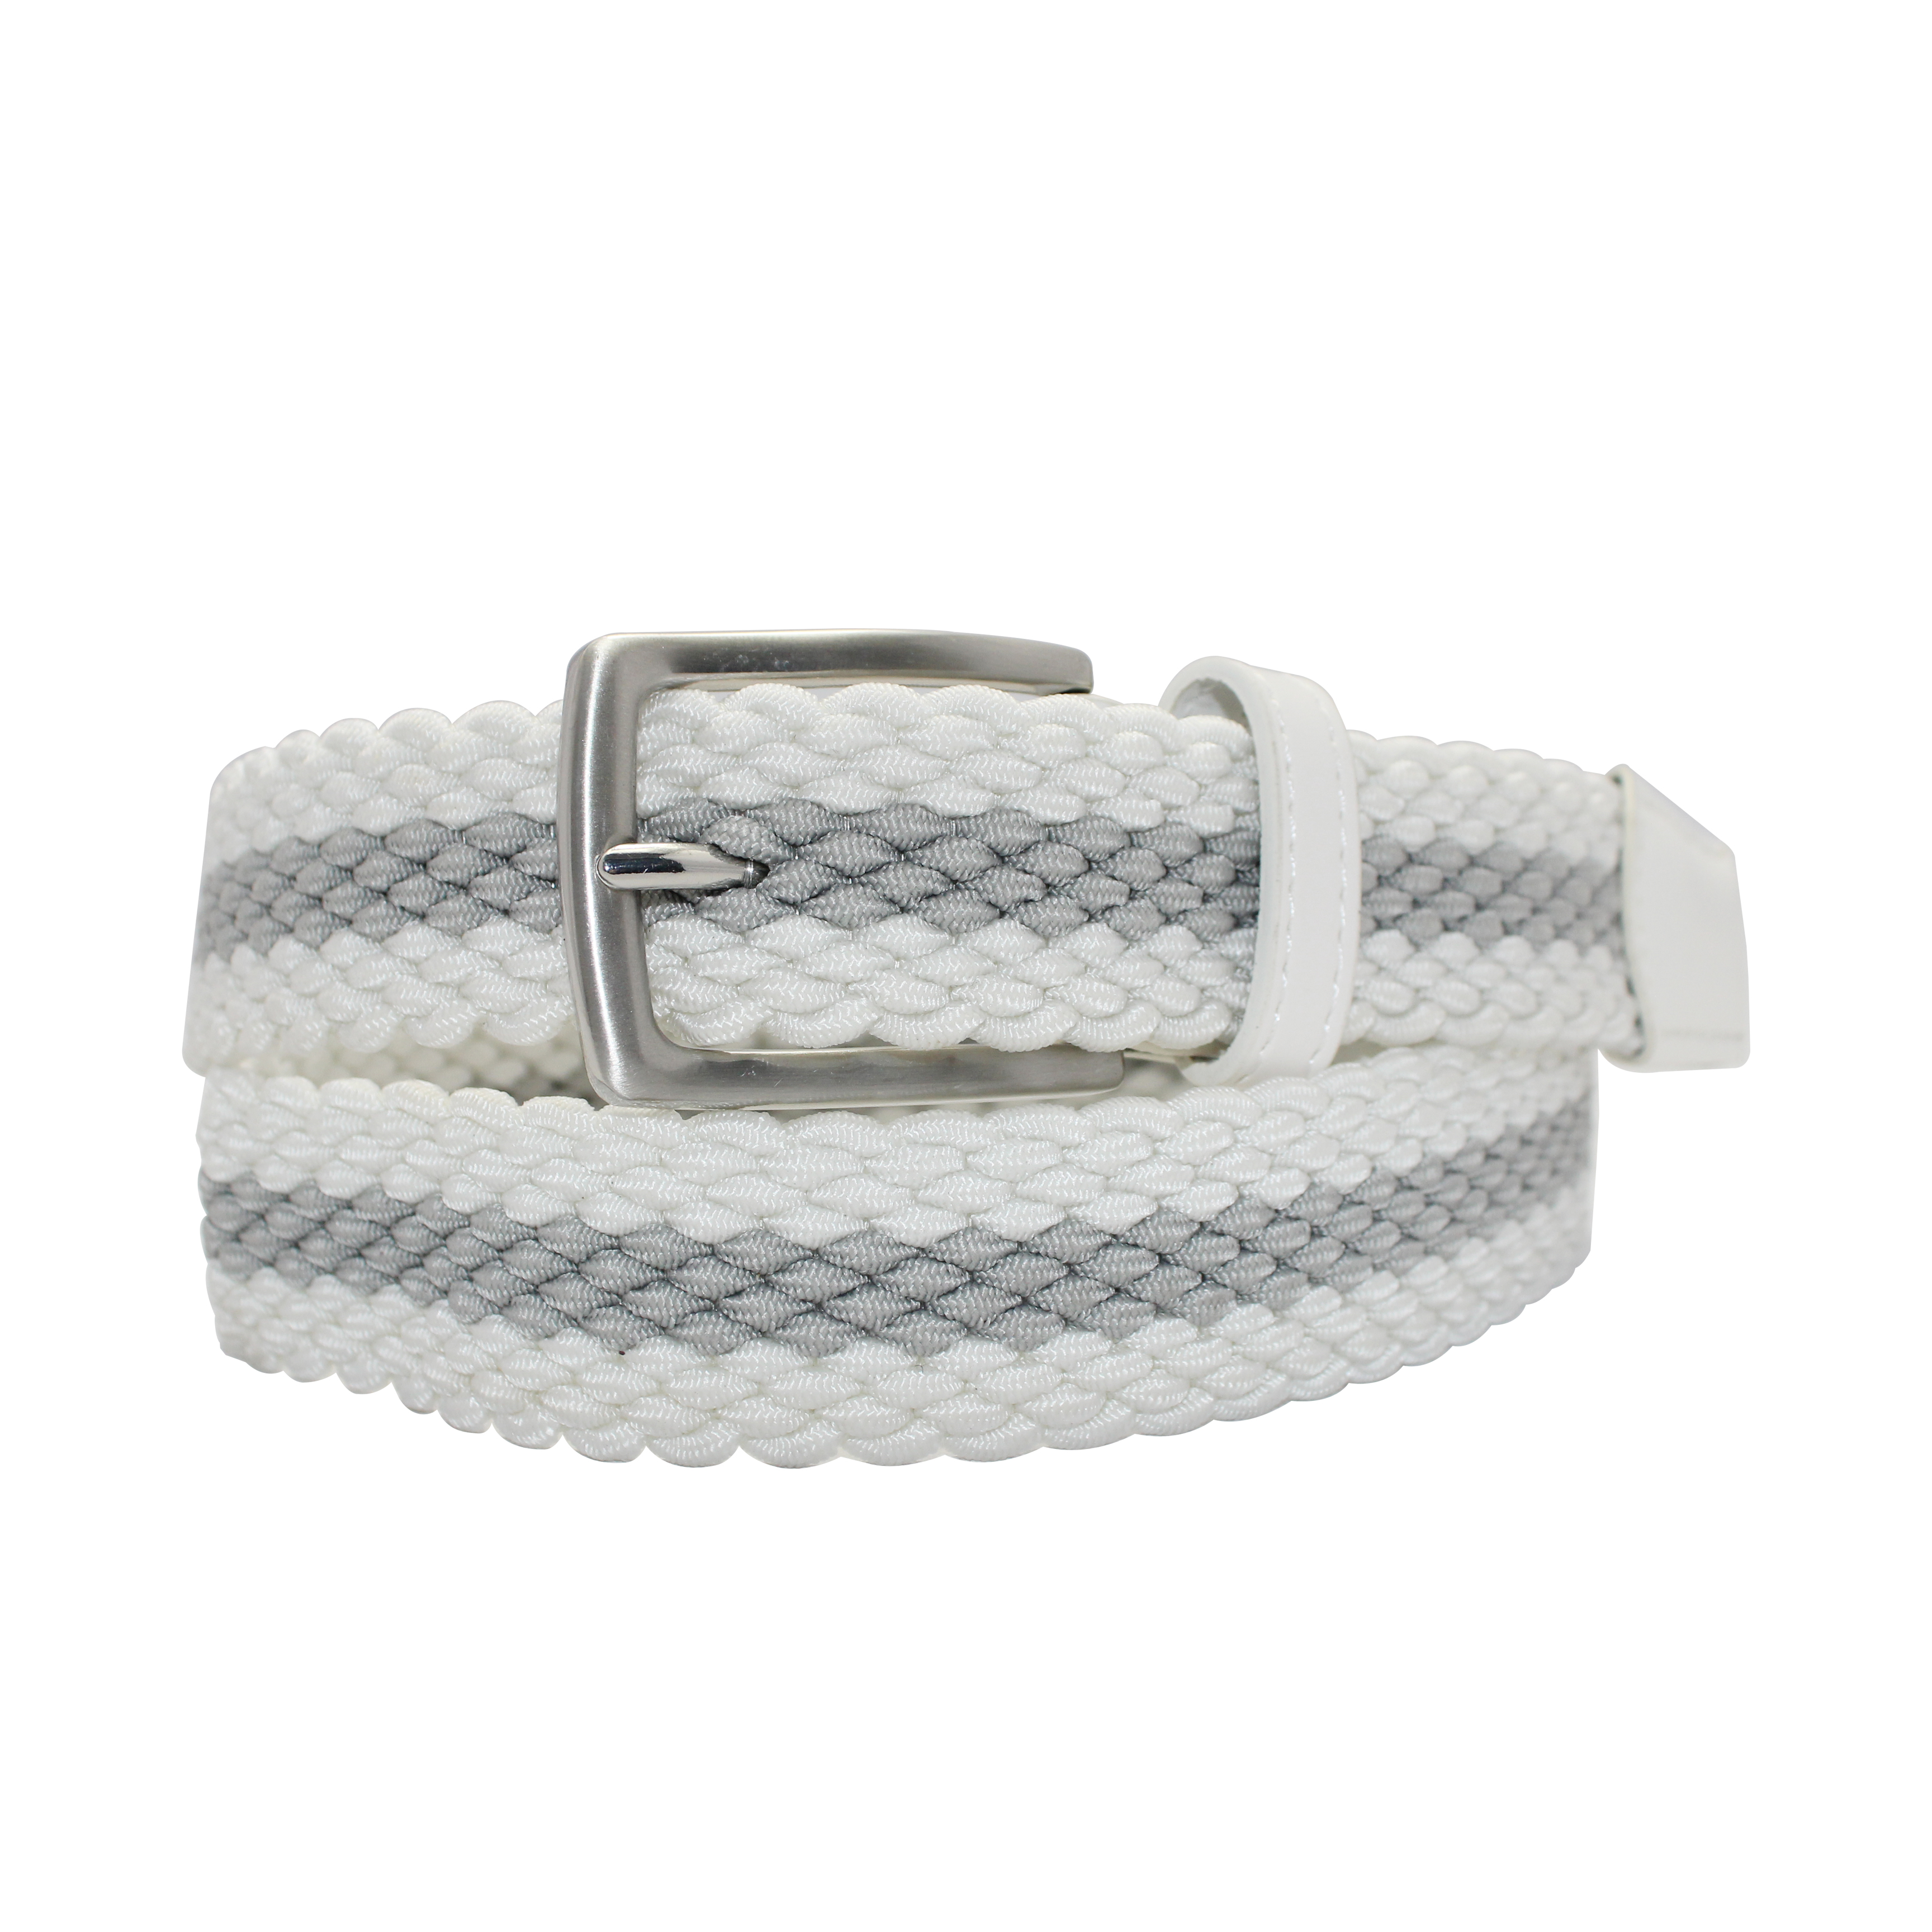 Personalized elastic Belt with Nameplate Buckle 35-23034B Featured Image